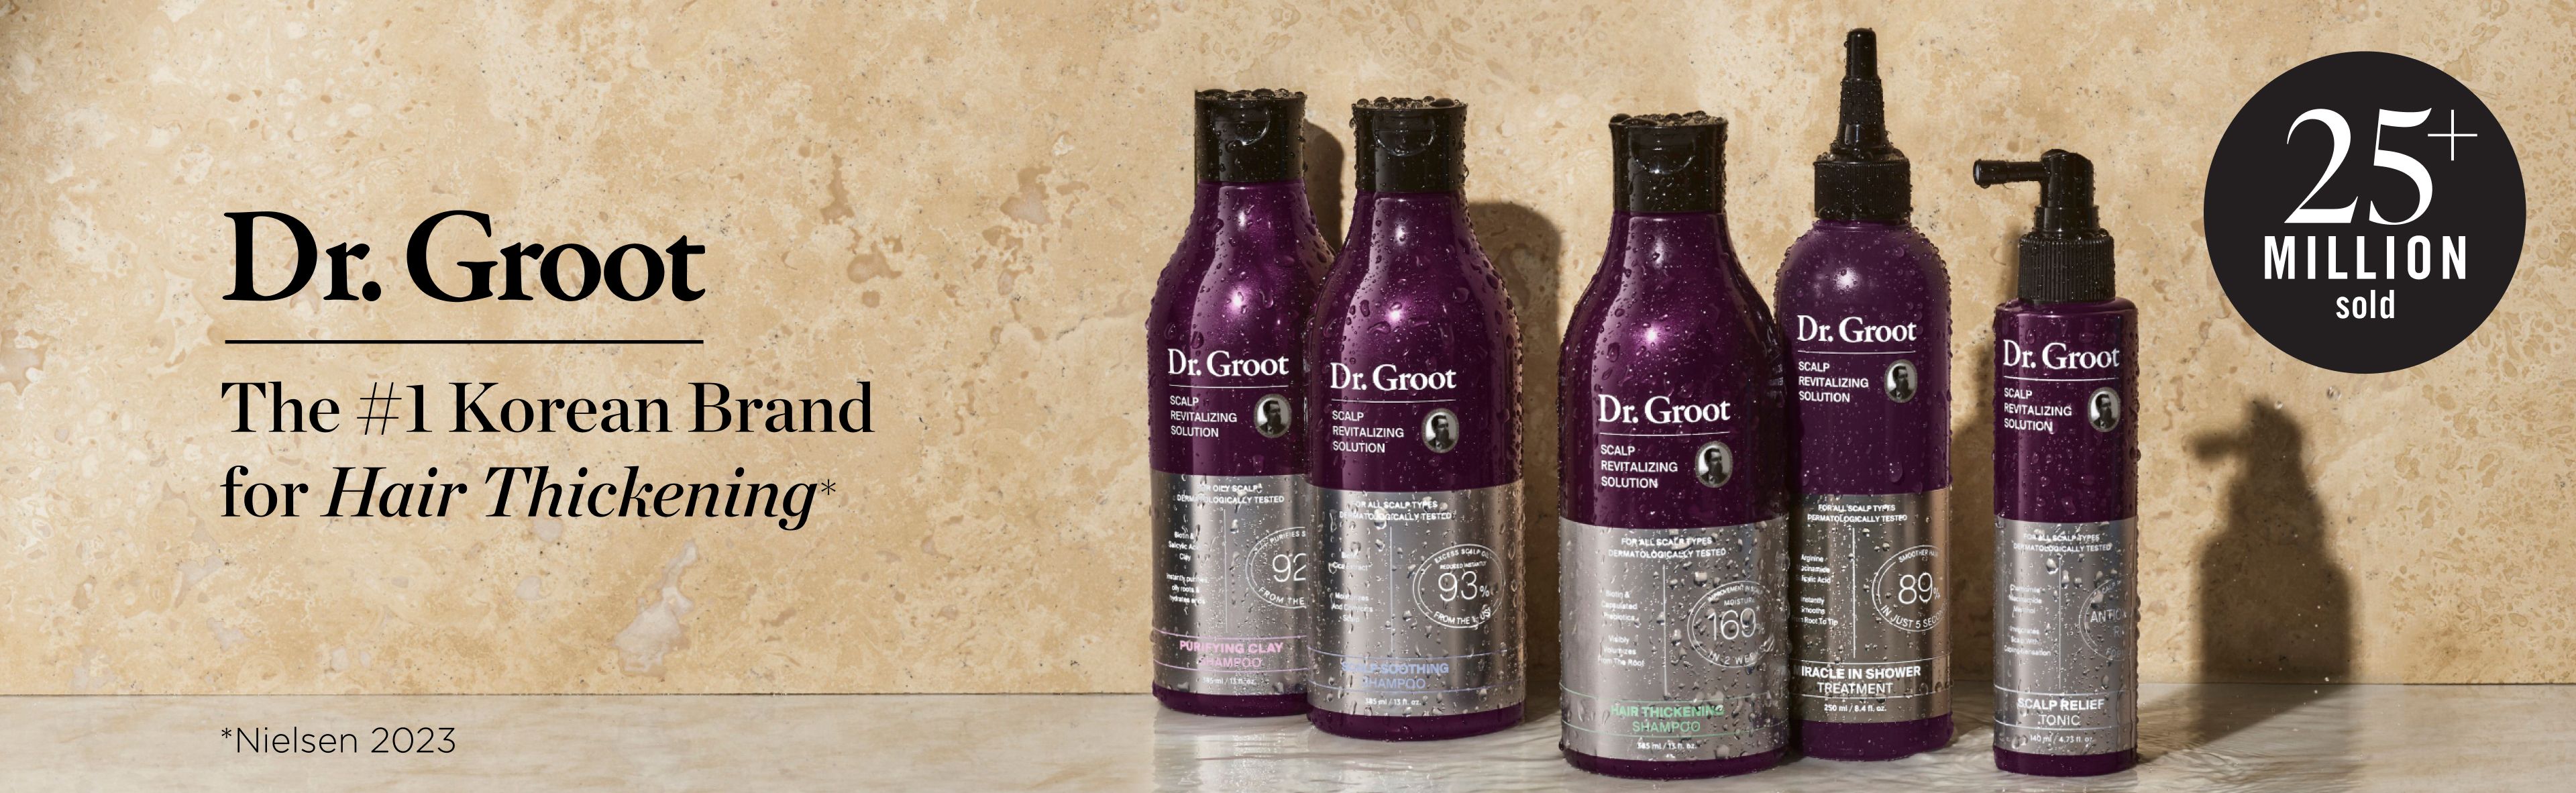 A range of Dr. Groot scalp care and shampoo products sit on a bathroom shelf.  A black badge with white text that says "25+ million sold" sits in the top right corner. On the left, a claim in black text states a Dr. Groot logo and ''The #1 Korean Brand for Hair Thickening''